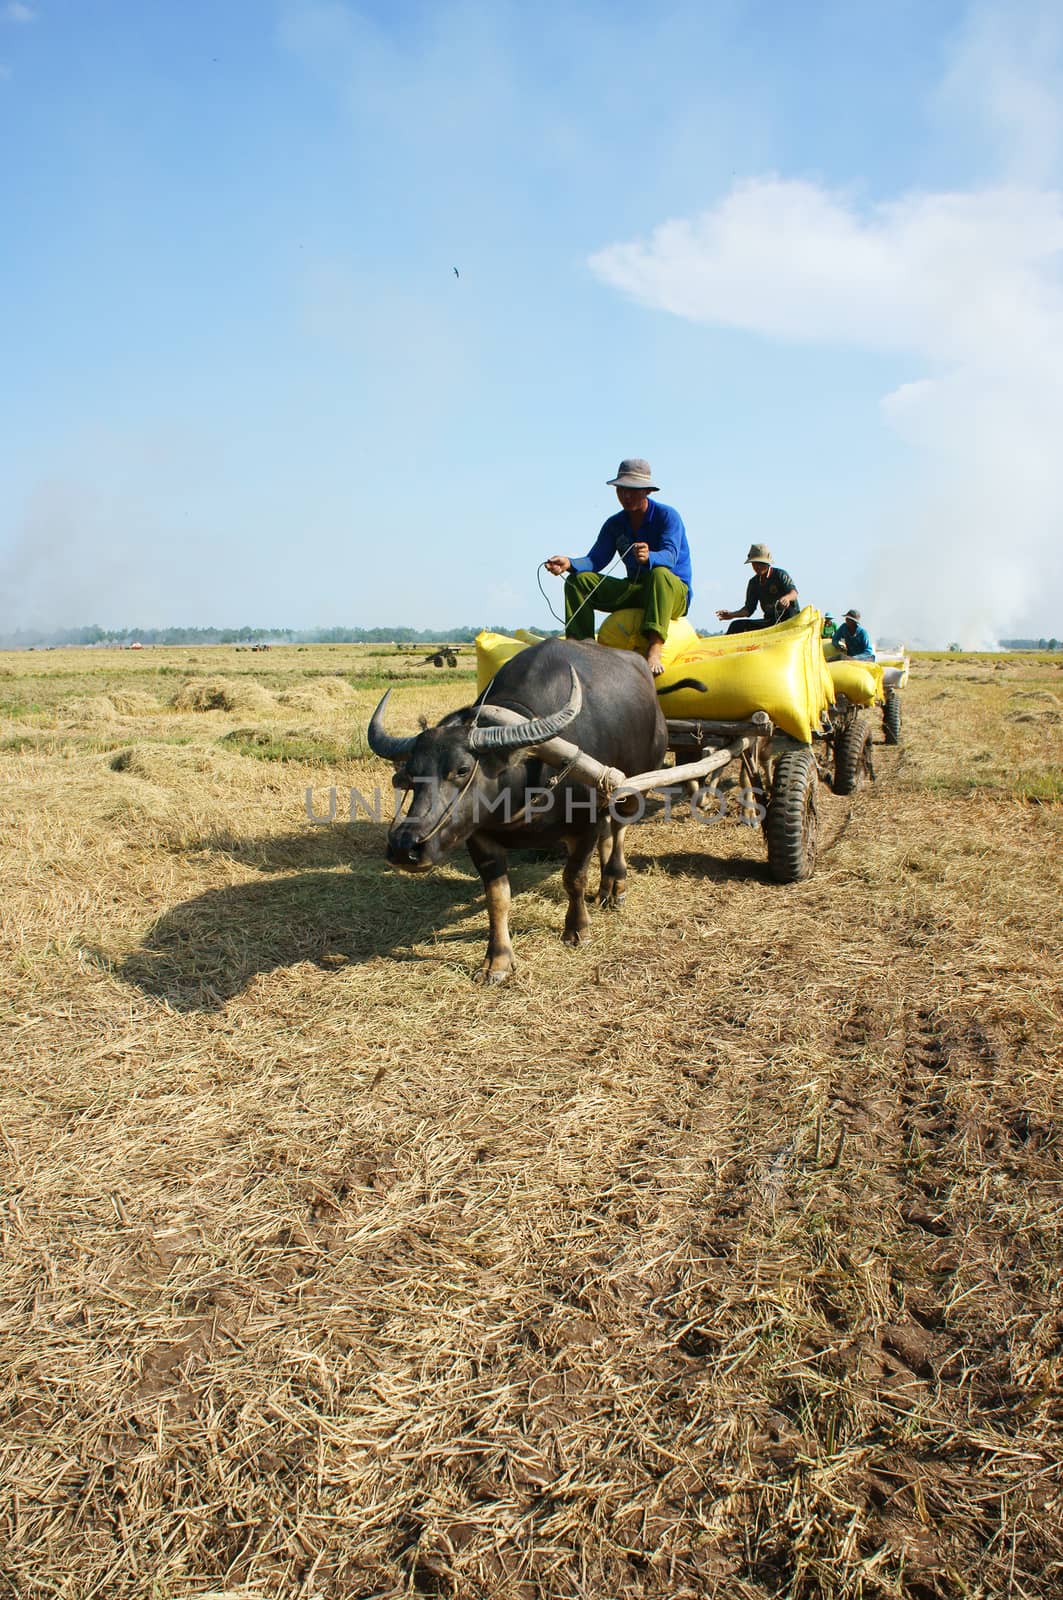 DONG THAP, VIET NAM- NOVEMBER 12: Buffalo cart transport paddy in rice sack after harvest on rice field in sunny day in Dong Thap, Viet Nam on November 12, 2013